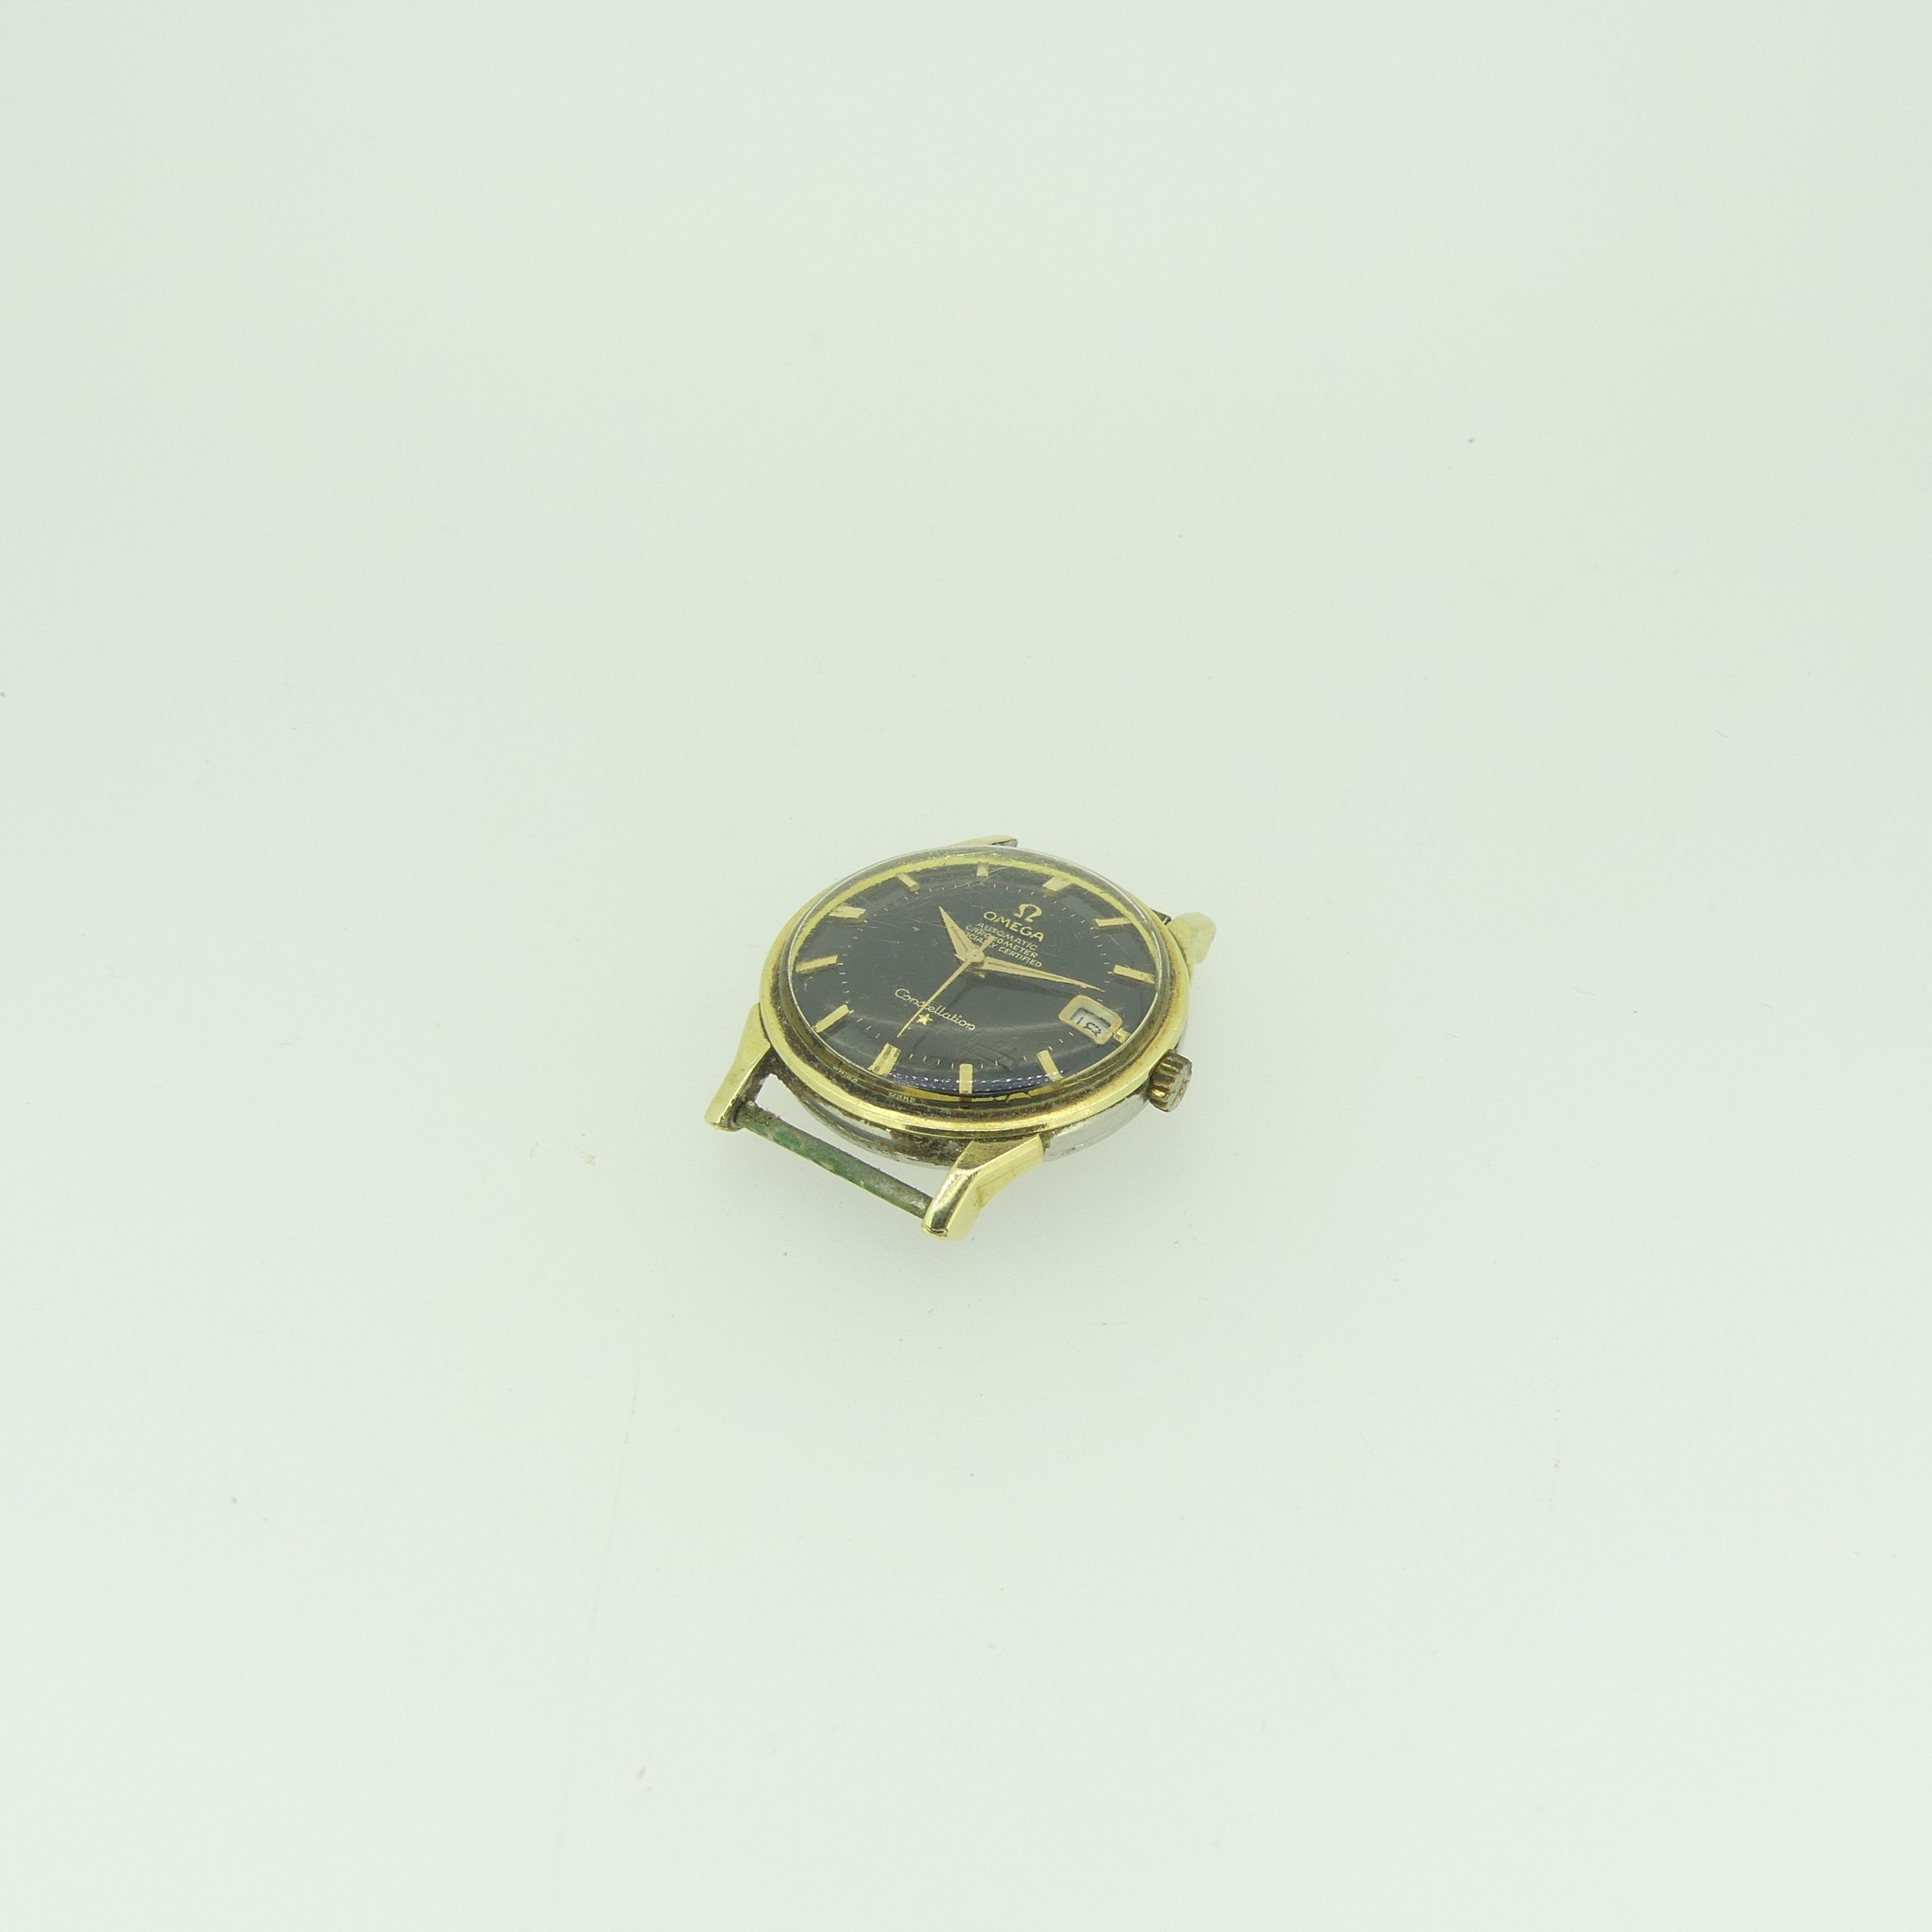 An Omega Constellation gold plated Wristwatch, 168.005, cal.561 movement no. 20952657, black dial - Image 2 of 5